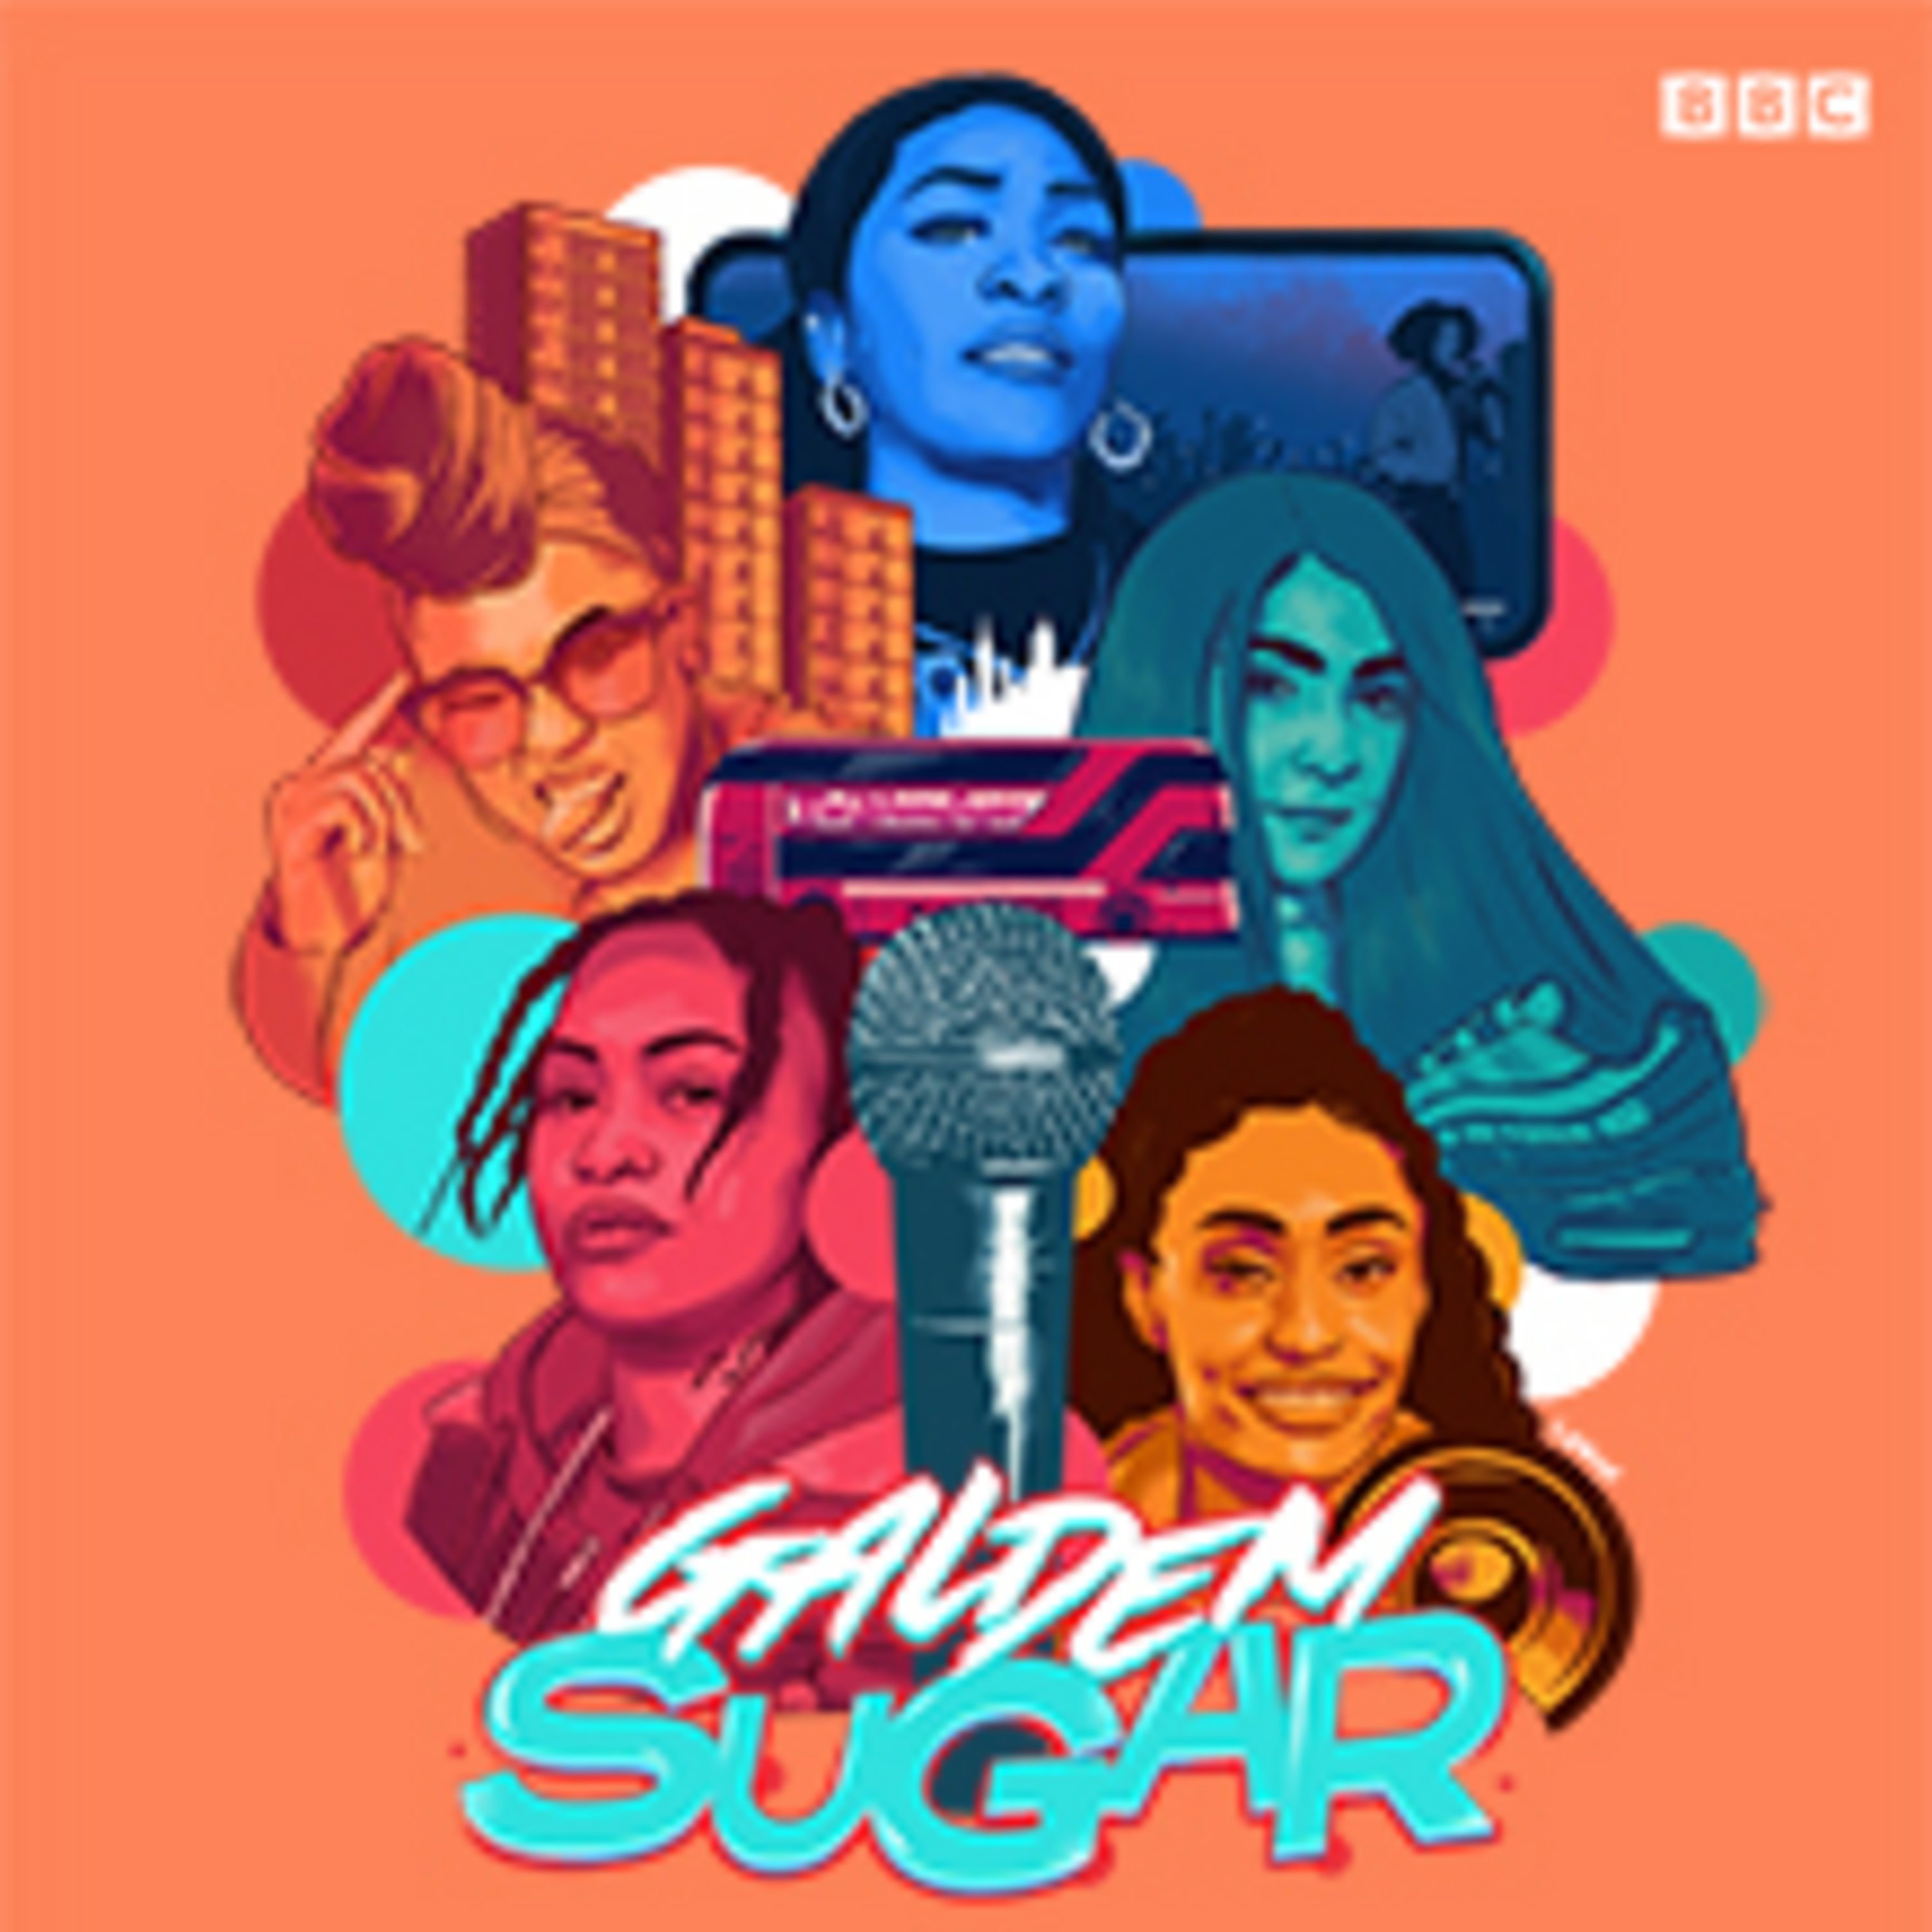 Galdem Sugar is coming to 1Xtra Chat!